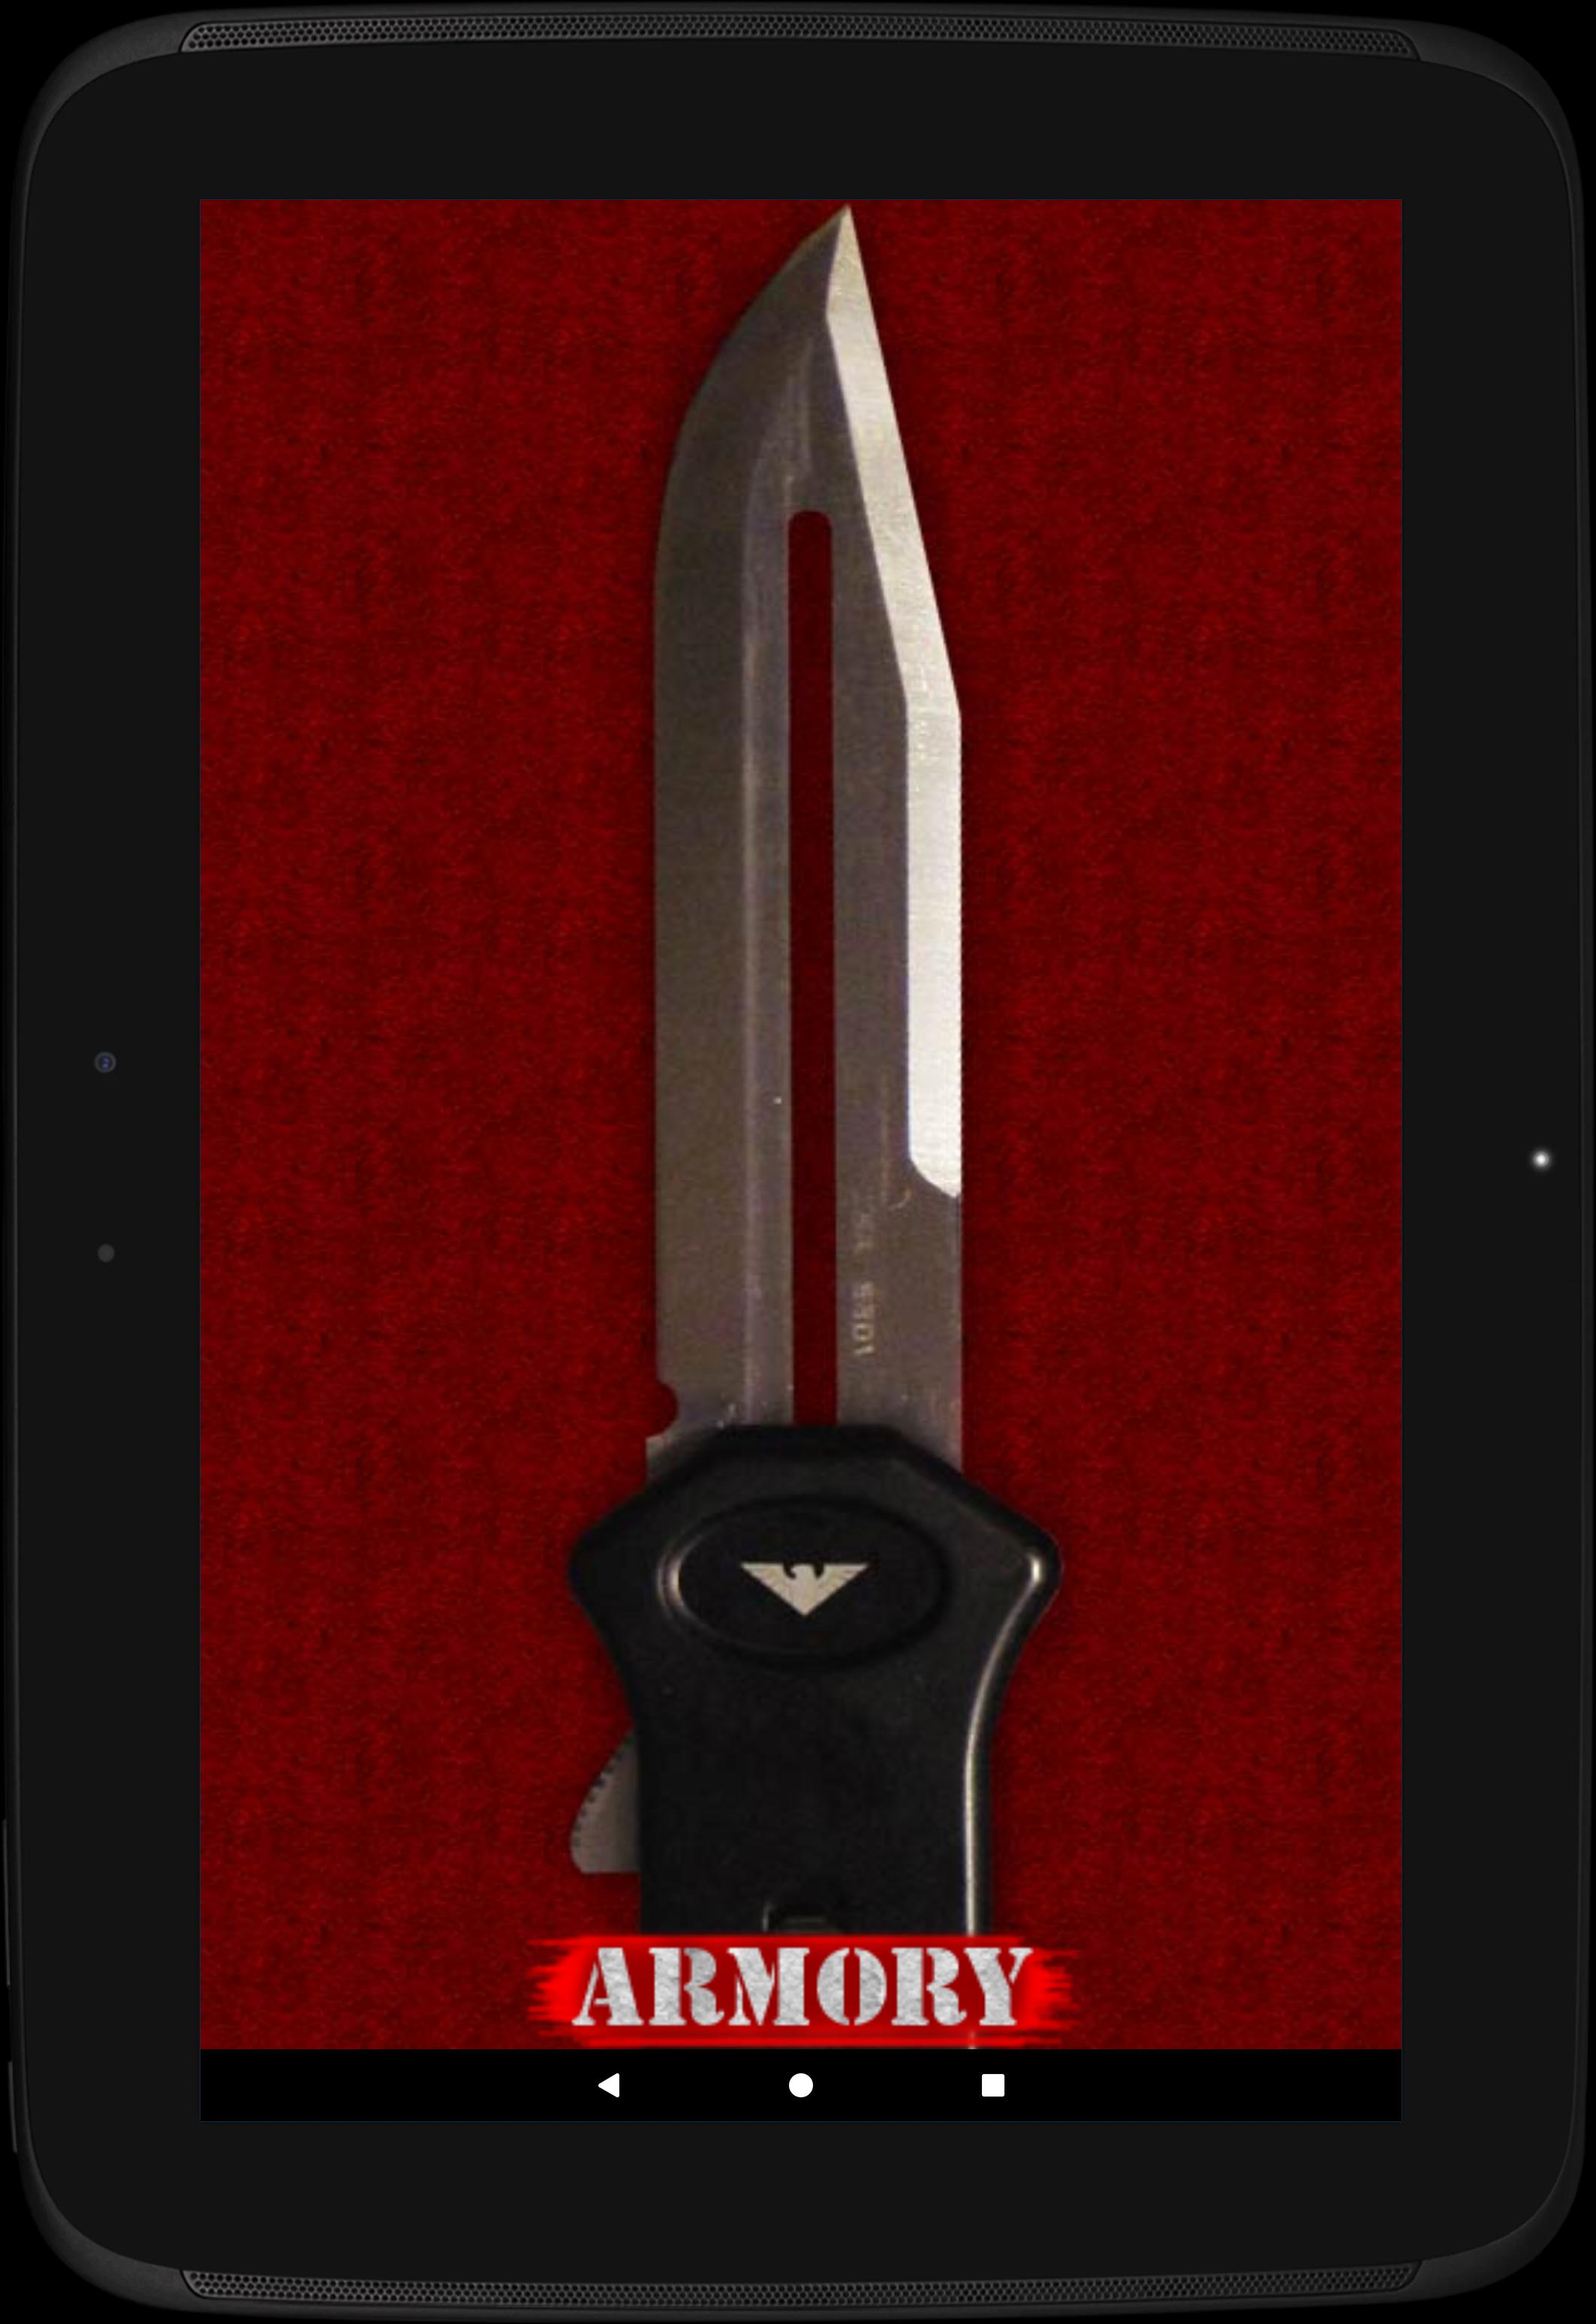 Flip Knife Challenge Throw Knife Simulator For Android Apk Download